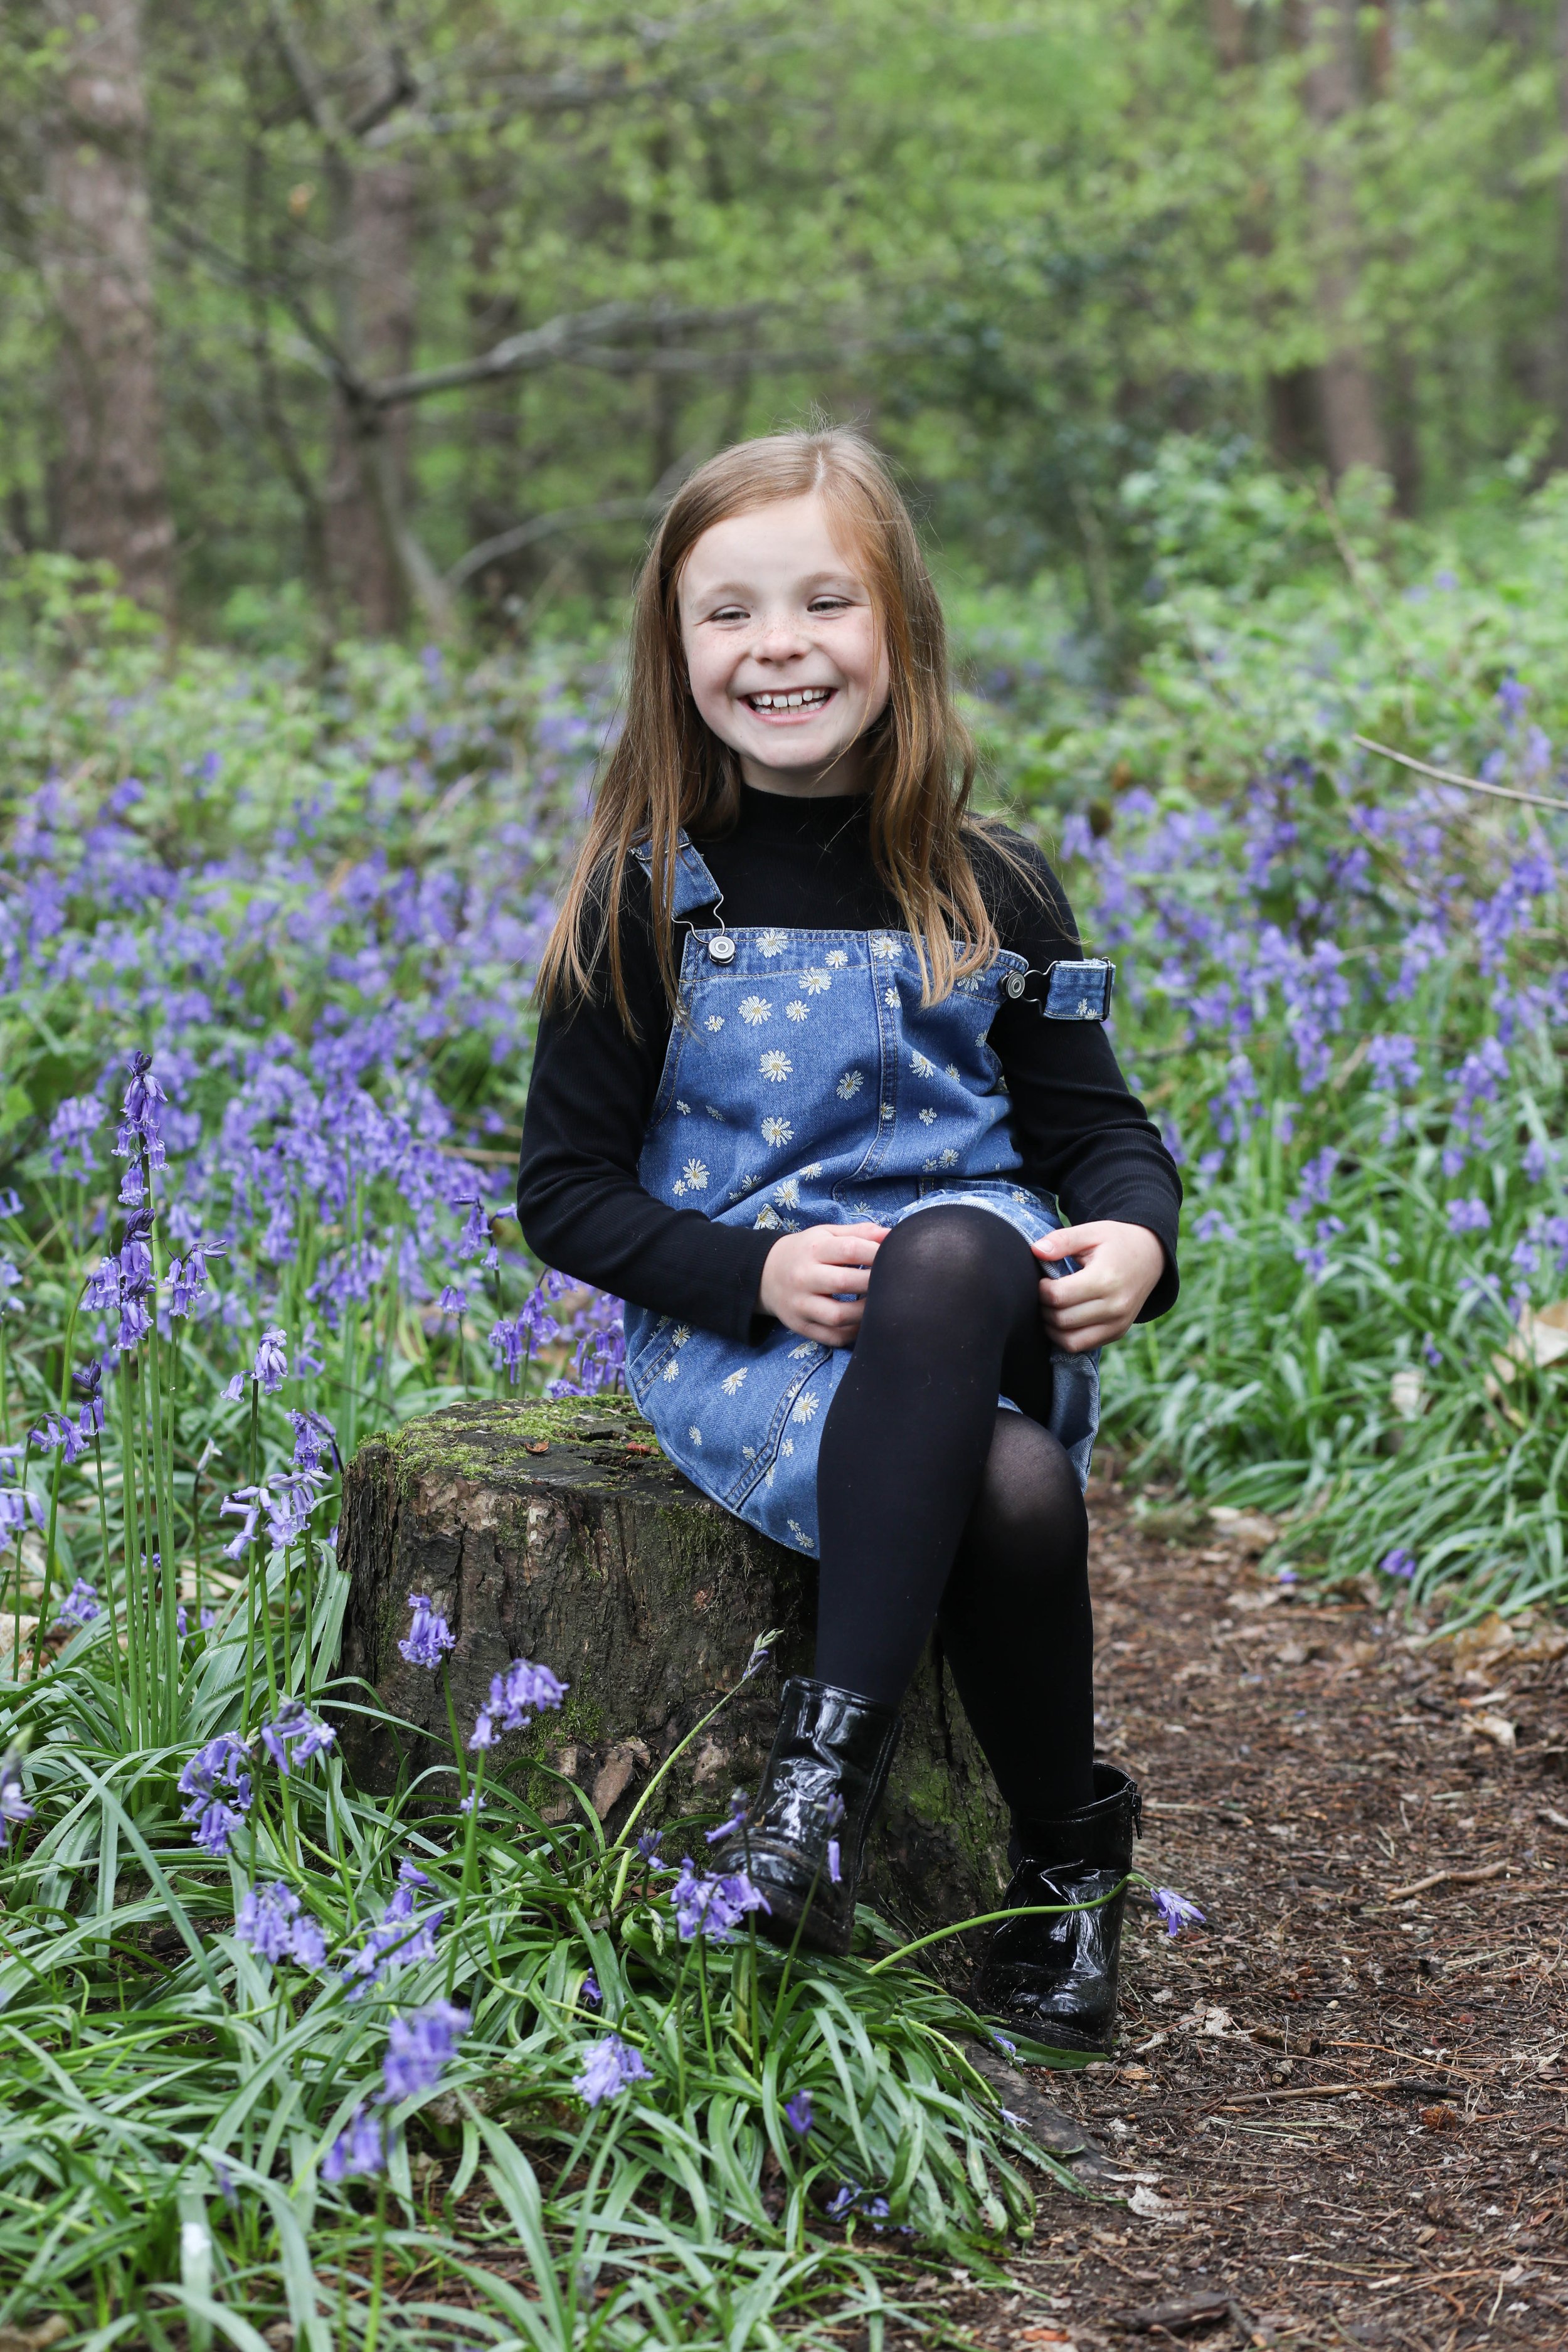 MUM AND DAUGHTER PHOTO SHOOT IN THE BLUEBELLS | BERKSHIRE PORTRAIT SHOOTS41 choice .JPG